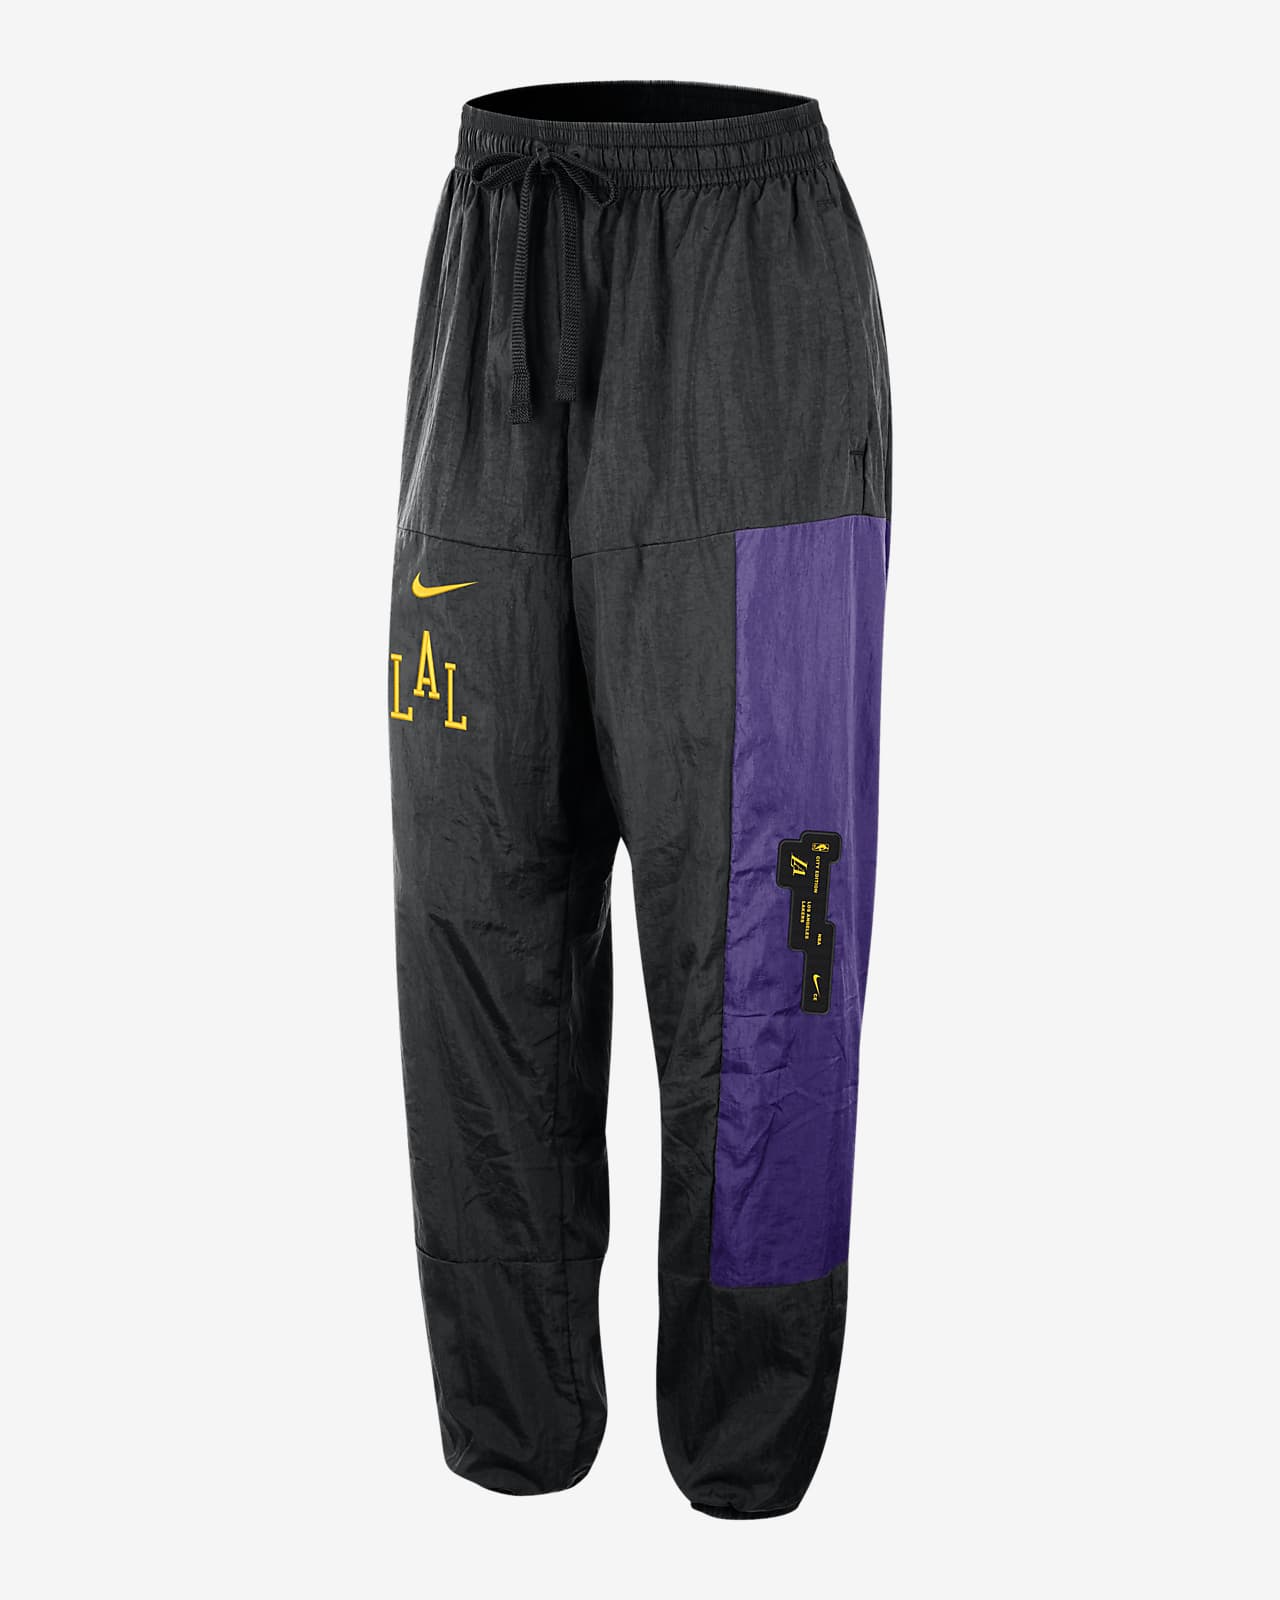 Los Angeles Lakers Starting 5 2023/24 City Edition Men's Nike NBA Courtside Pants